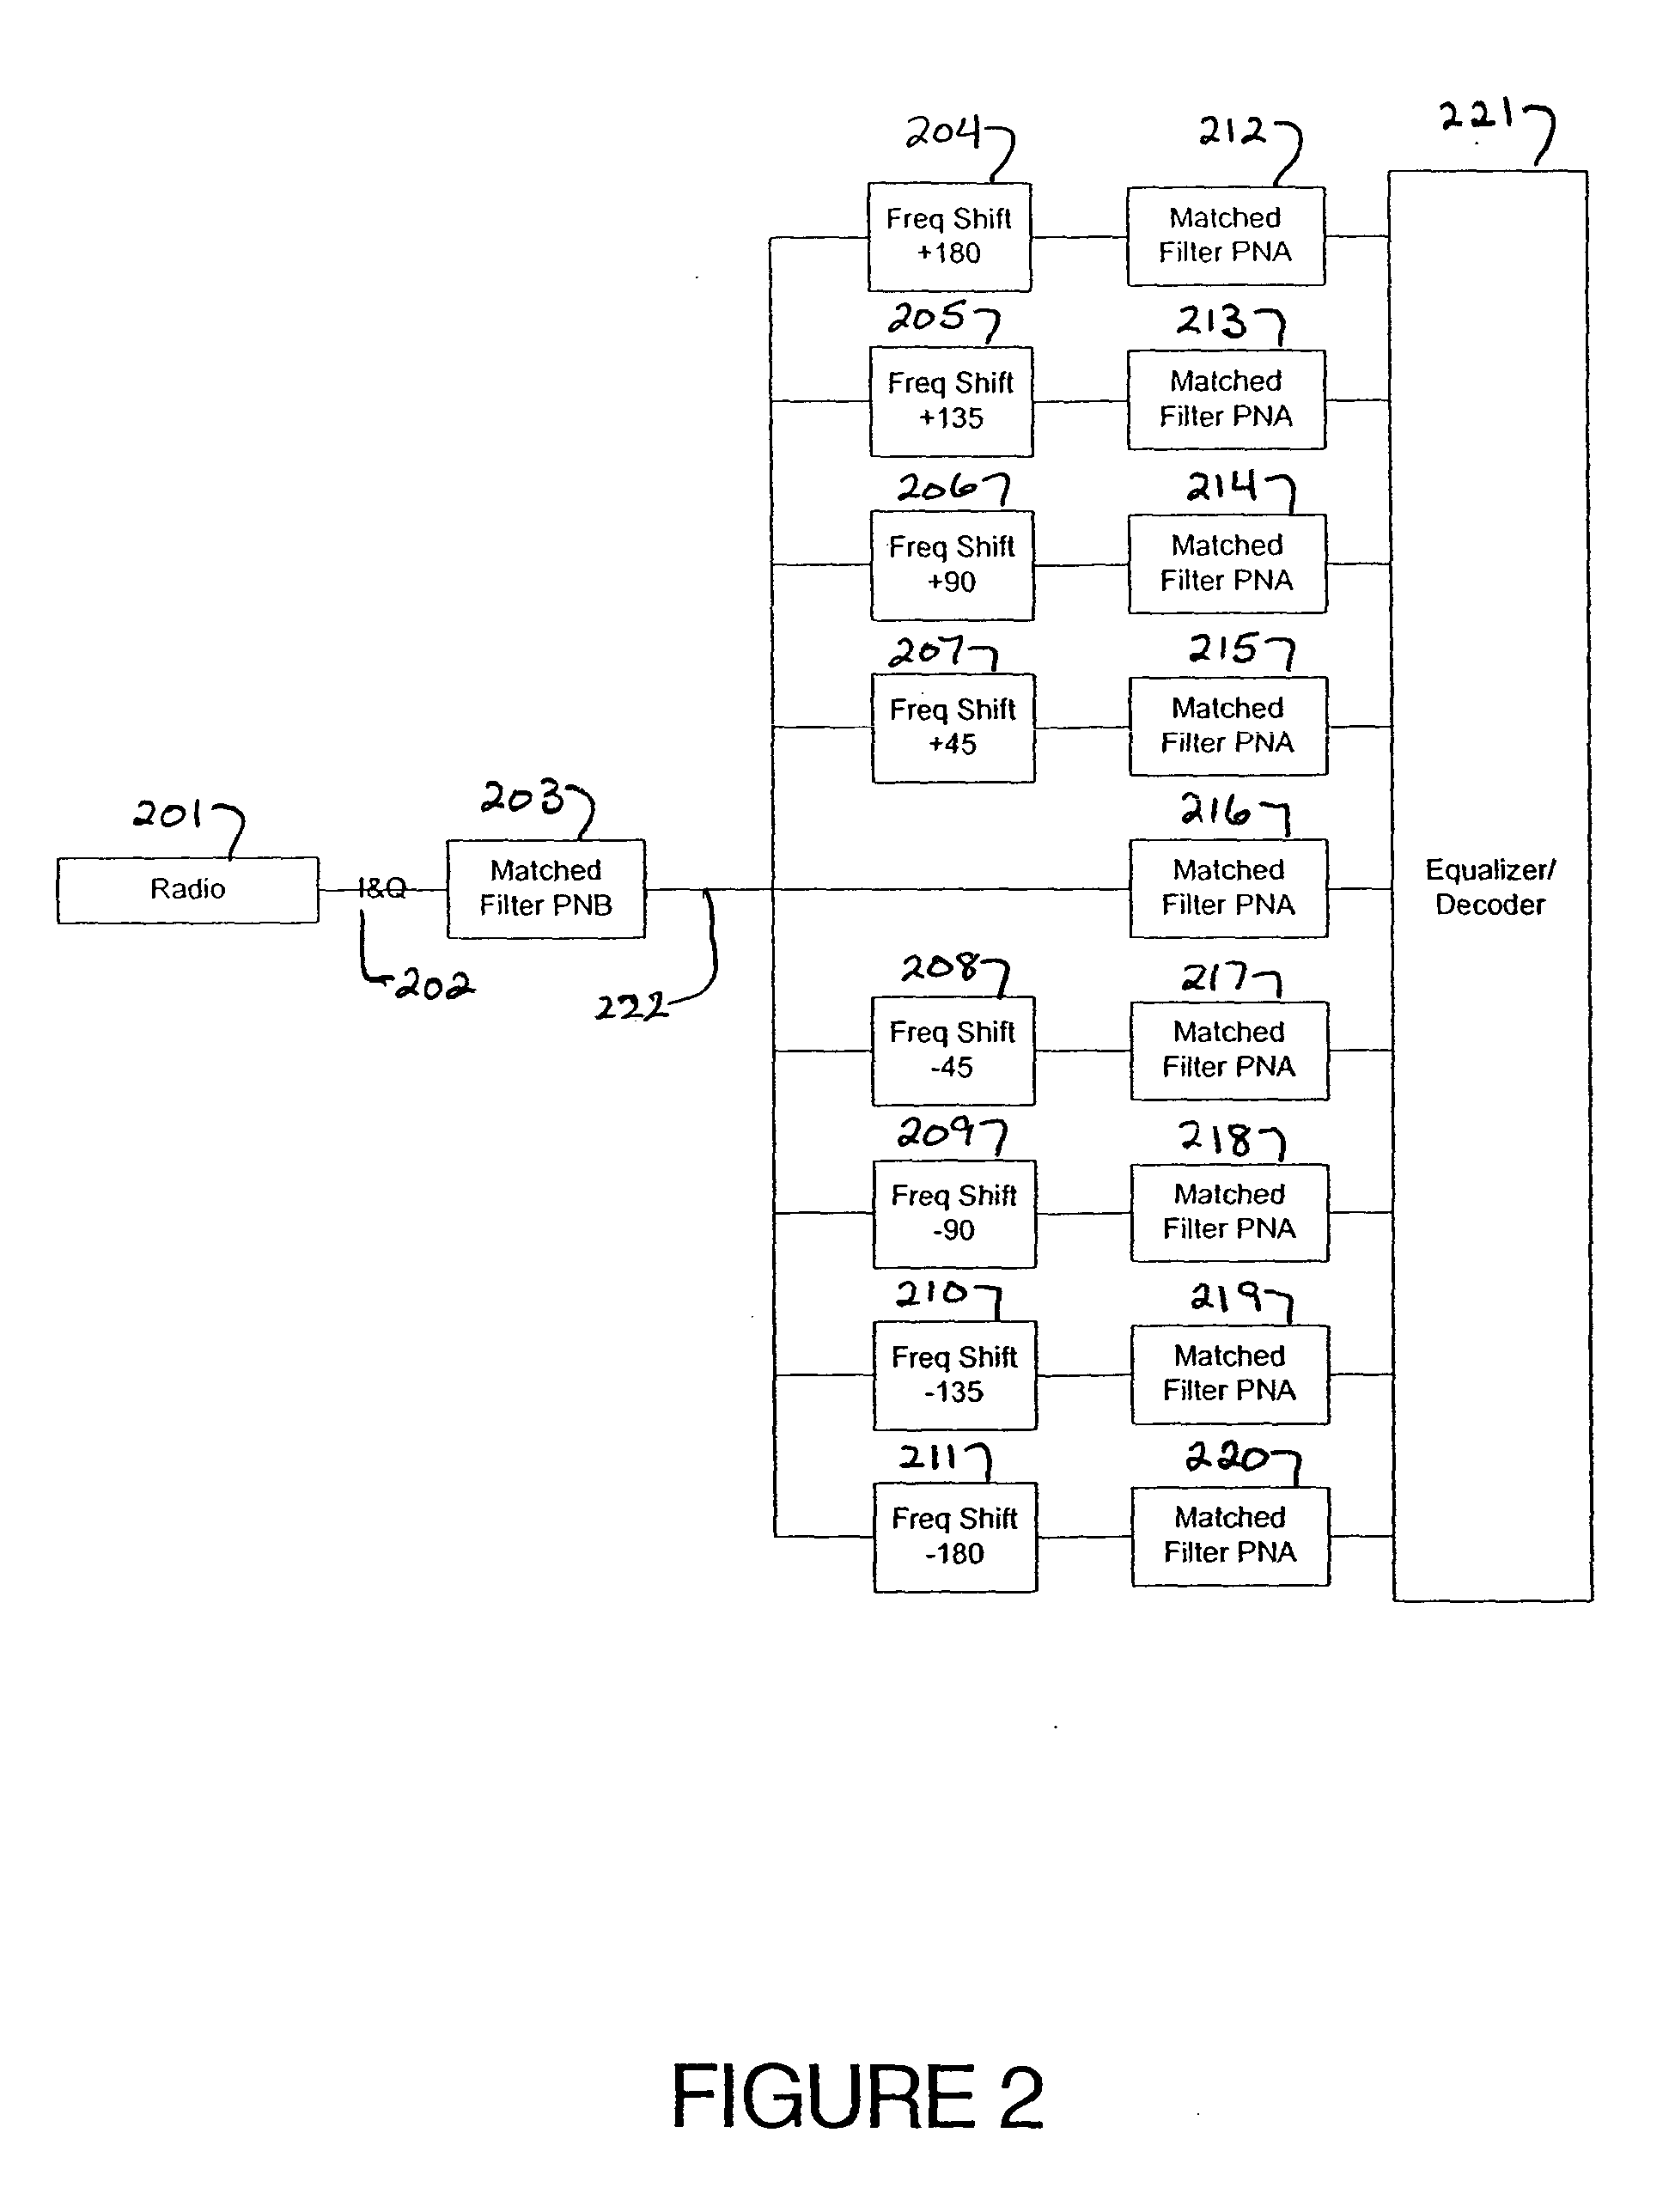 Matched filter for scalable spread spectrum communications systems